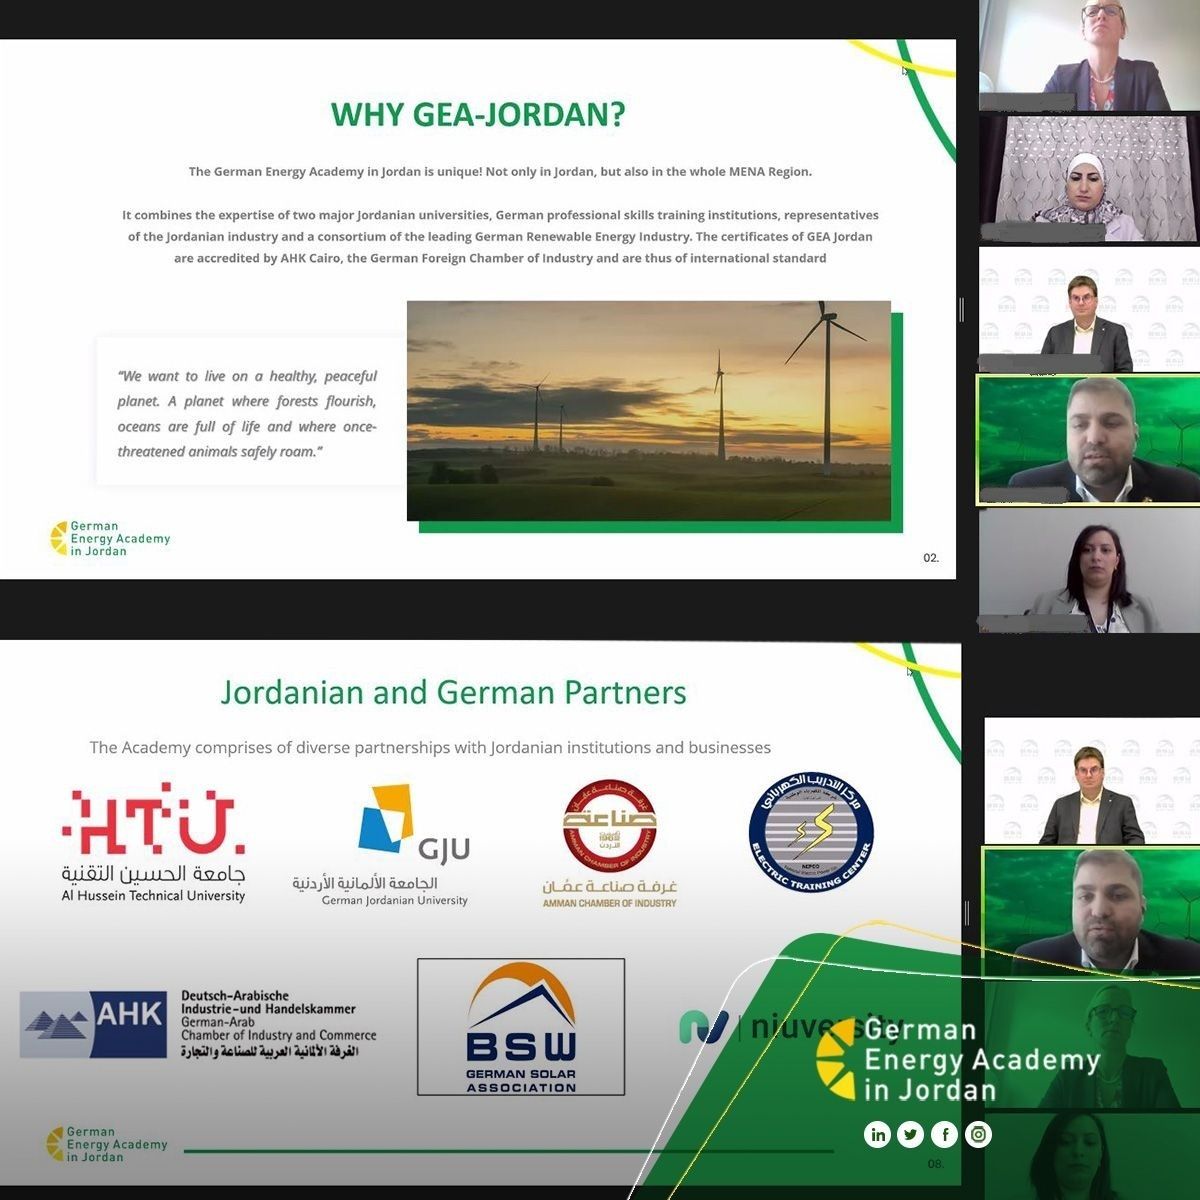 Introduction about GEA during the webinar